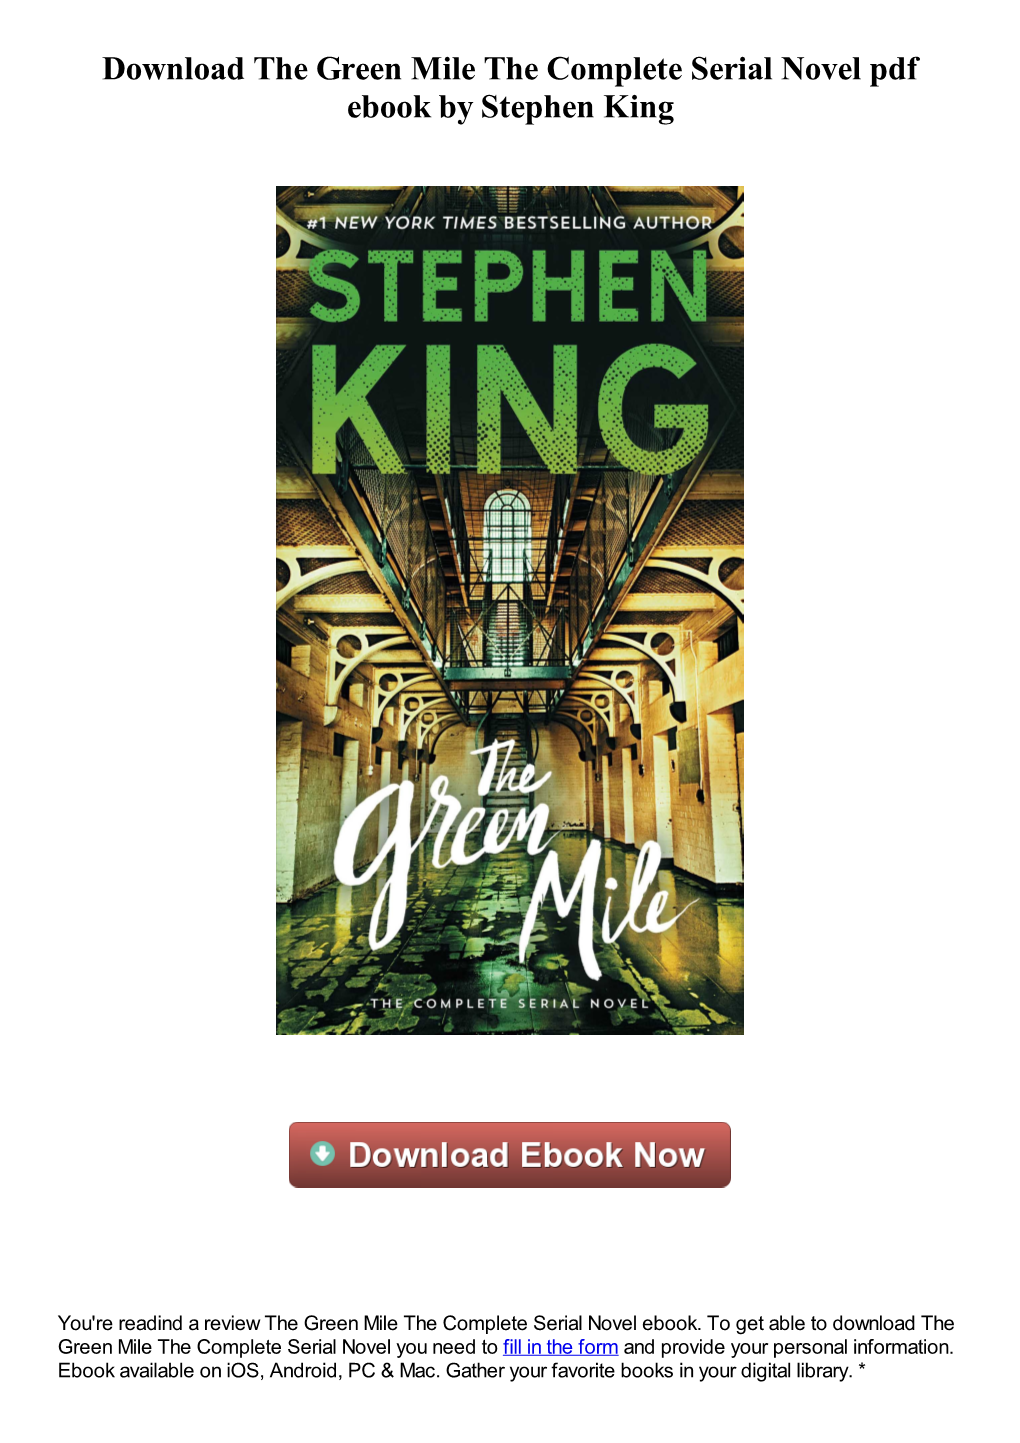 Download the Green Mile the Complete Serial Novel Pdf Ebook by Stephen King